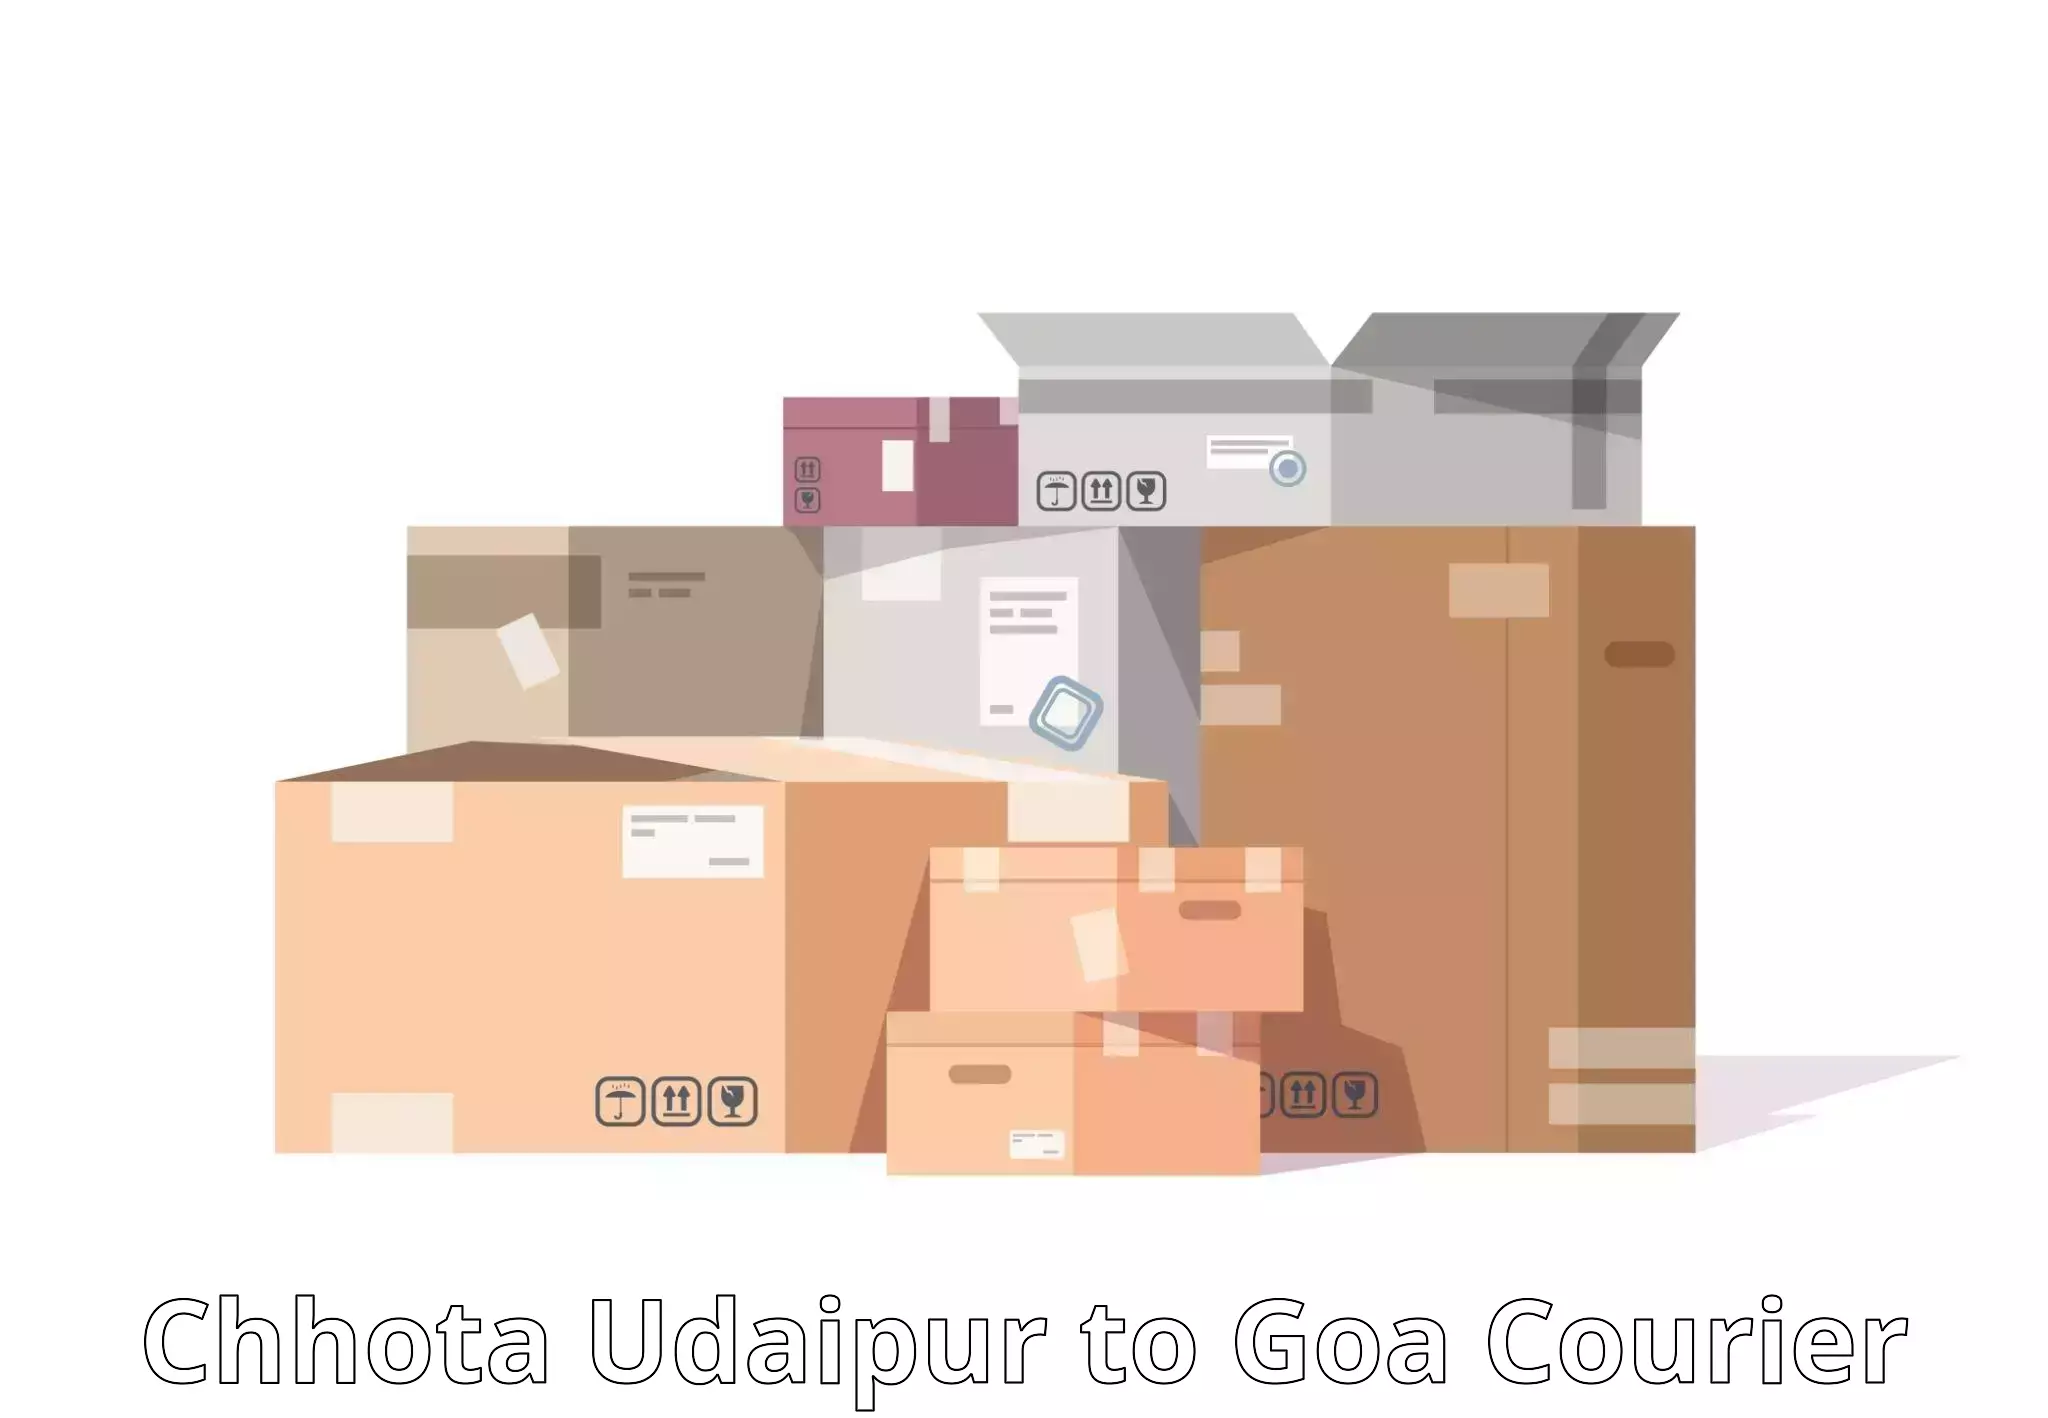 Reliable delivery network Chhota Udaipur to Panjim